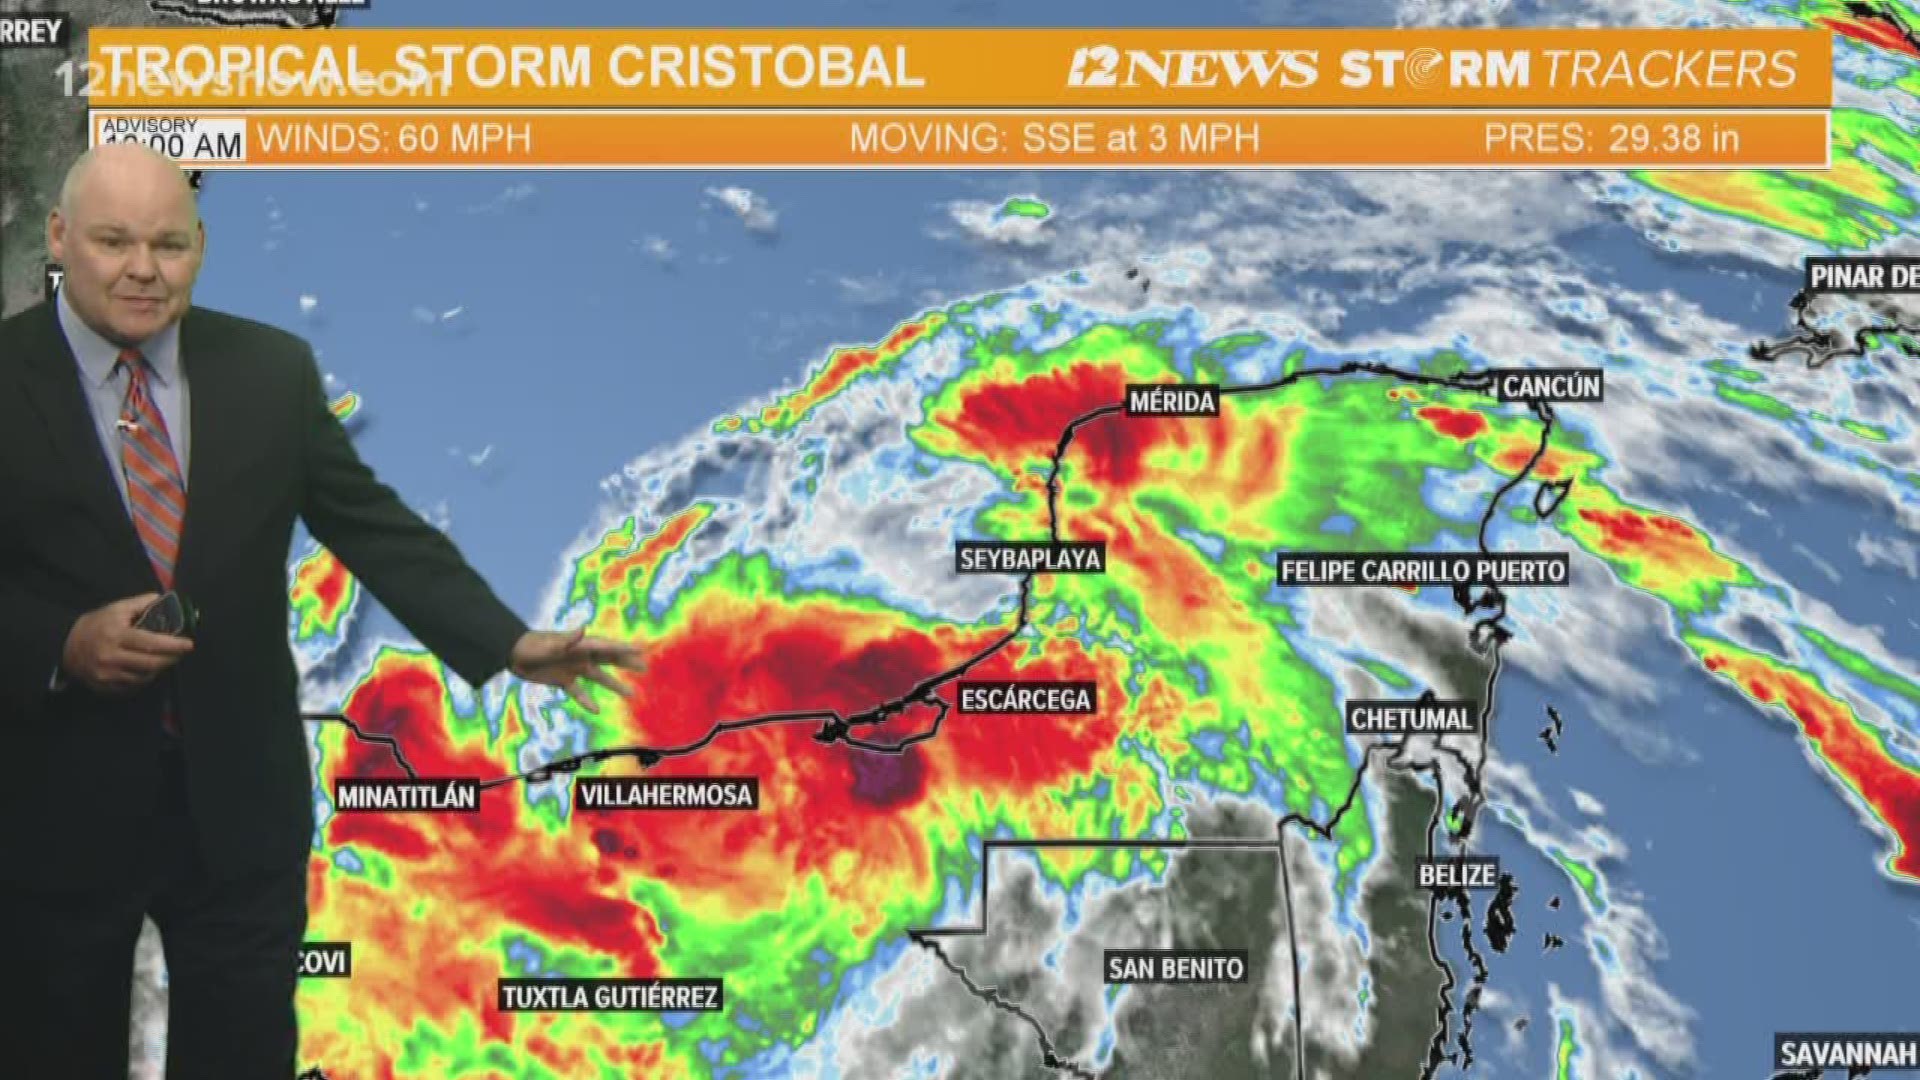 Tropical Storm Cristobal continues to move inland after making landfall in eastern Mexico and earlier today according to the 1 p.m. Wednesday advisory from the NWS.